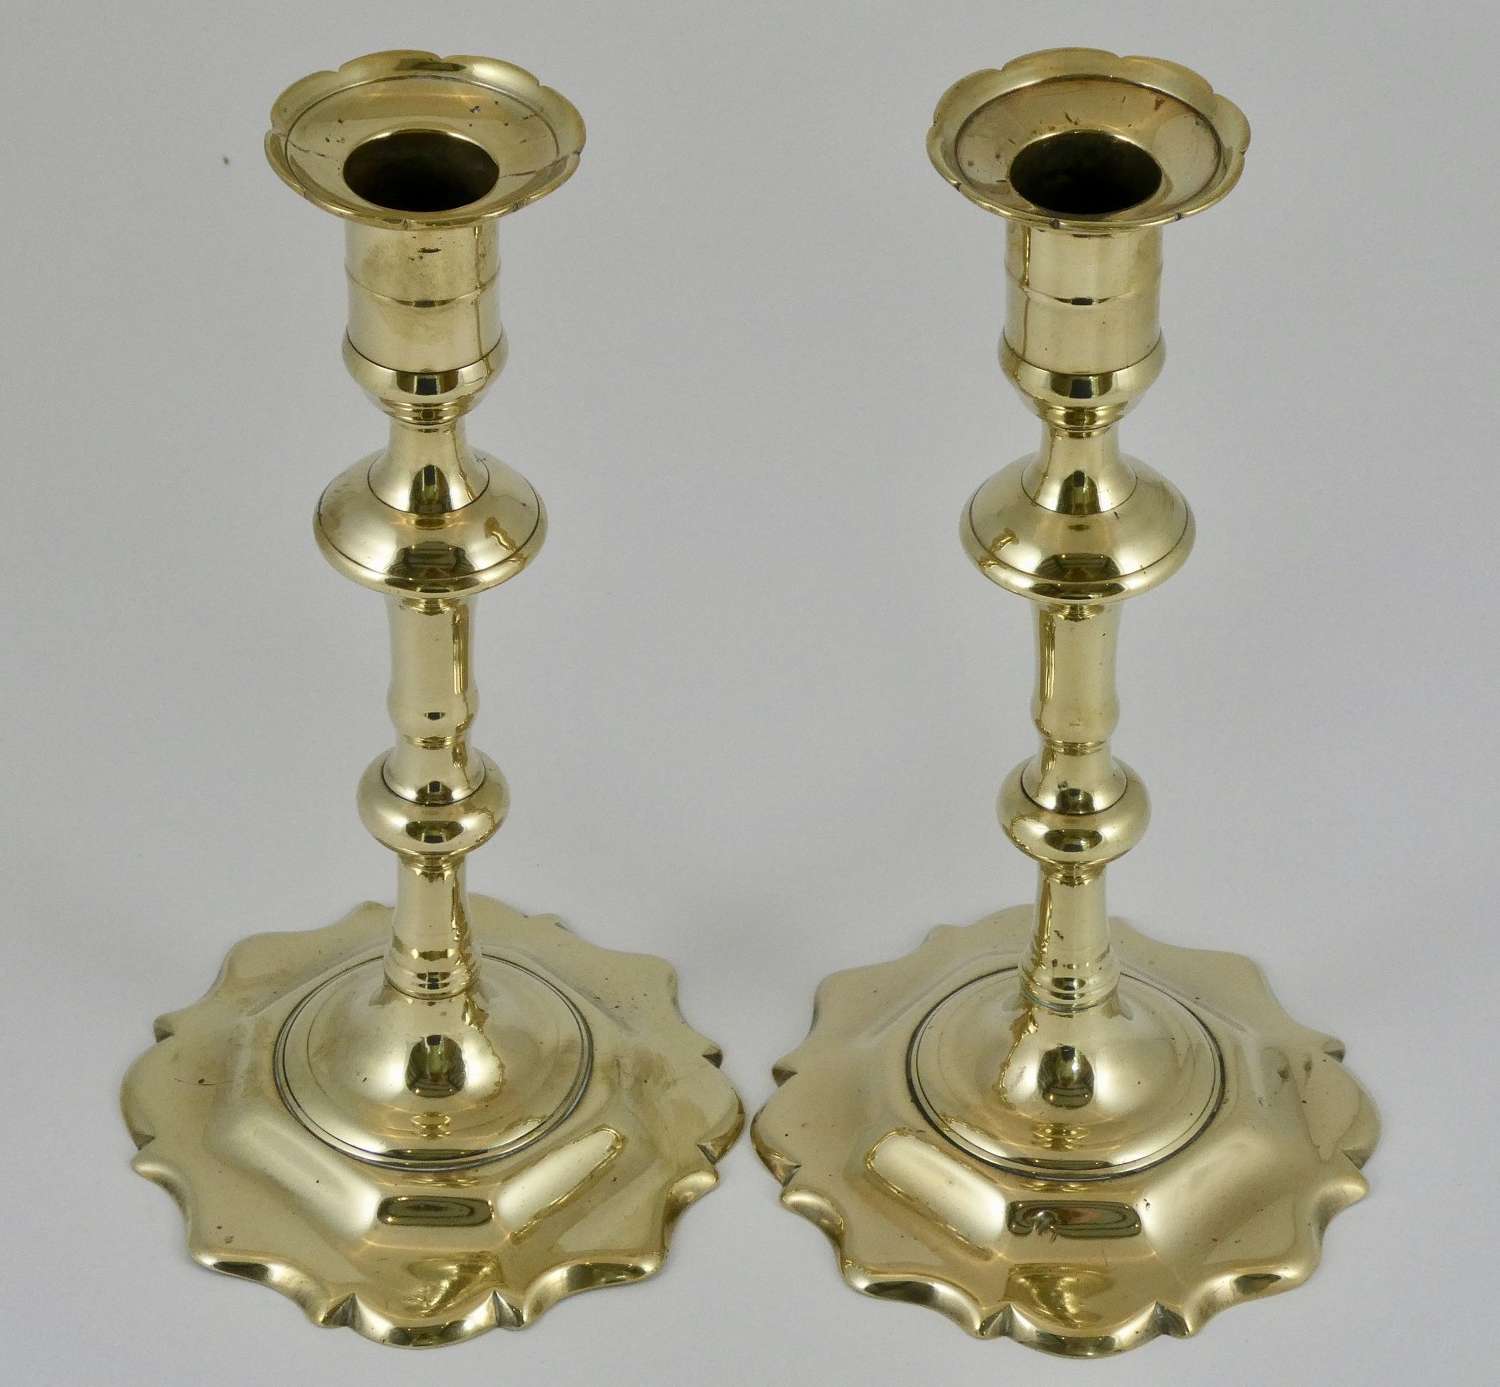 Pair of Seamed 18th Century Candlesticks